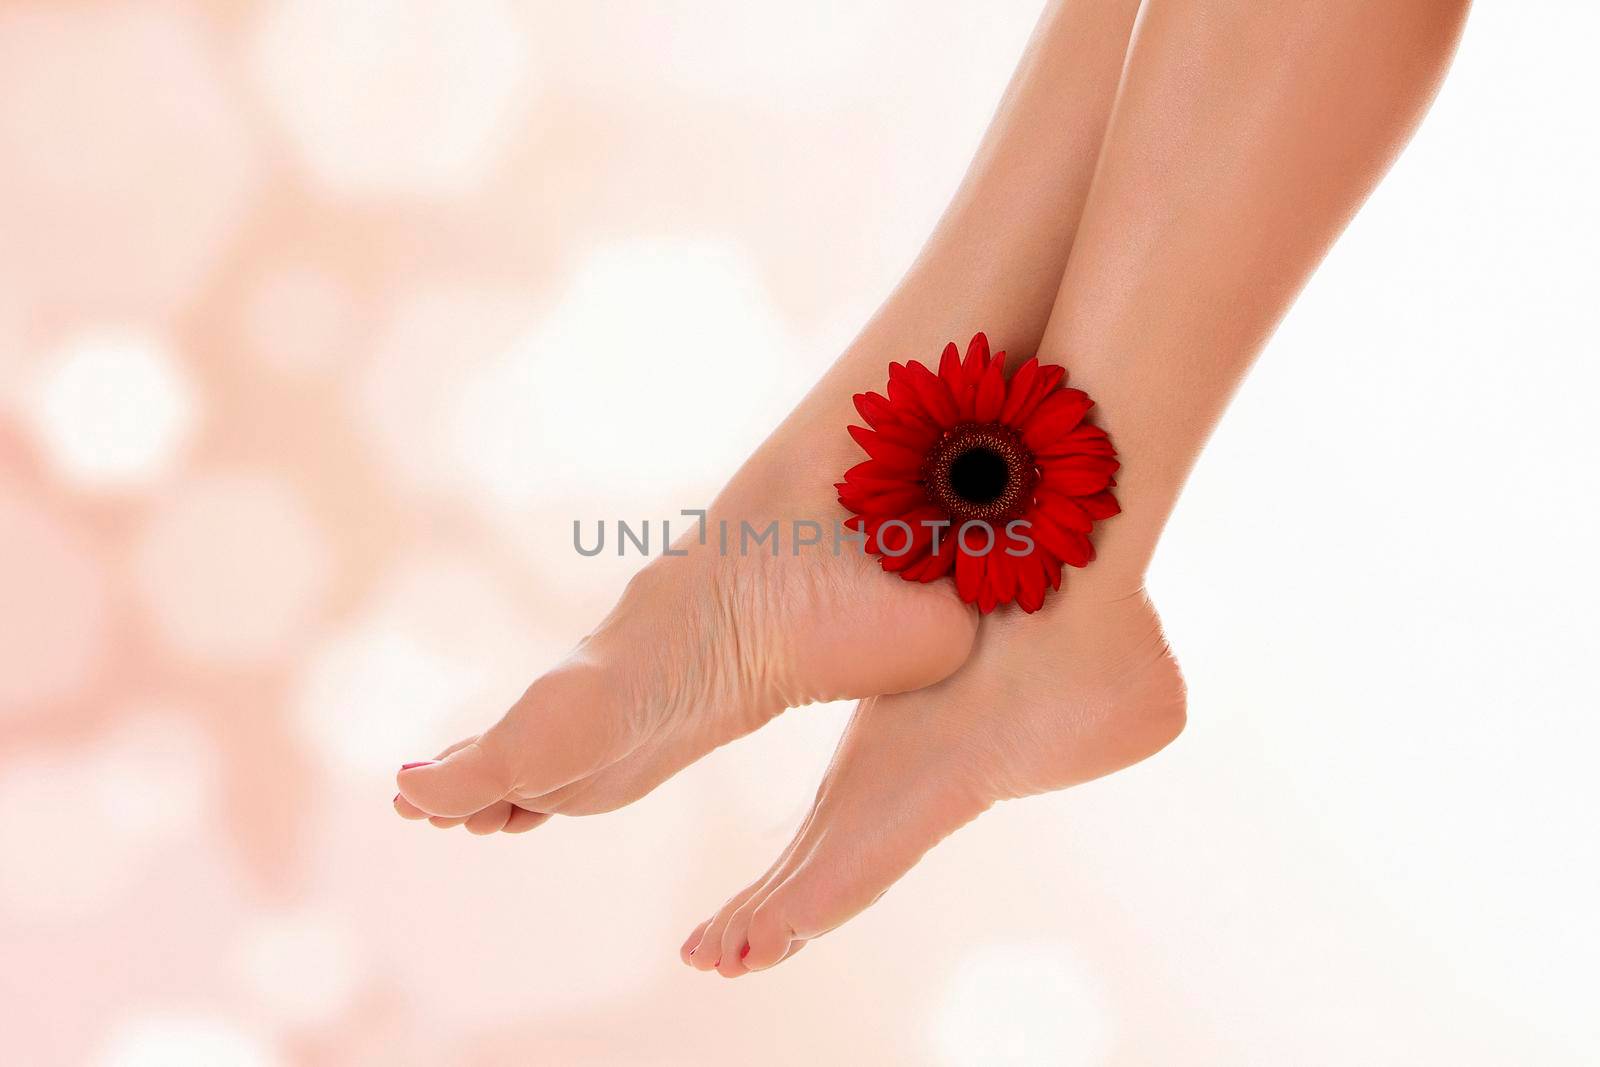 Female legs with red gerbera flower on pastel blurred background with